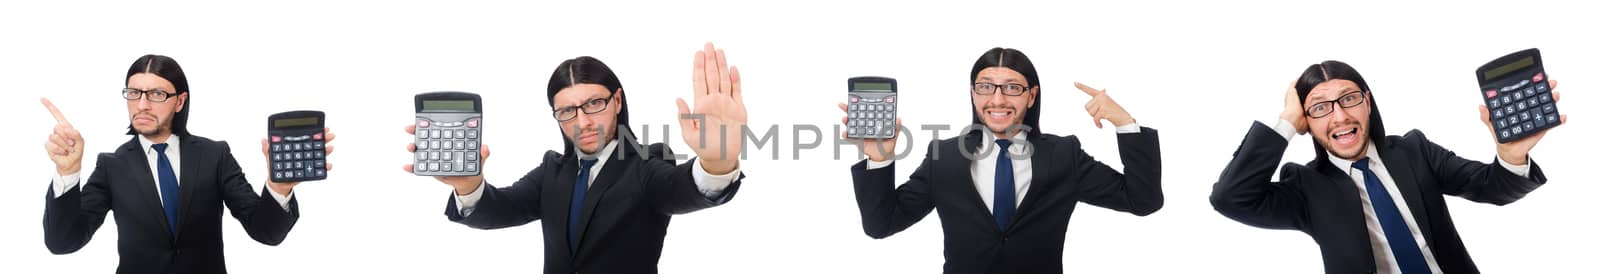 Man with calculator isolated on white